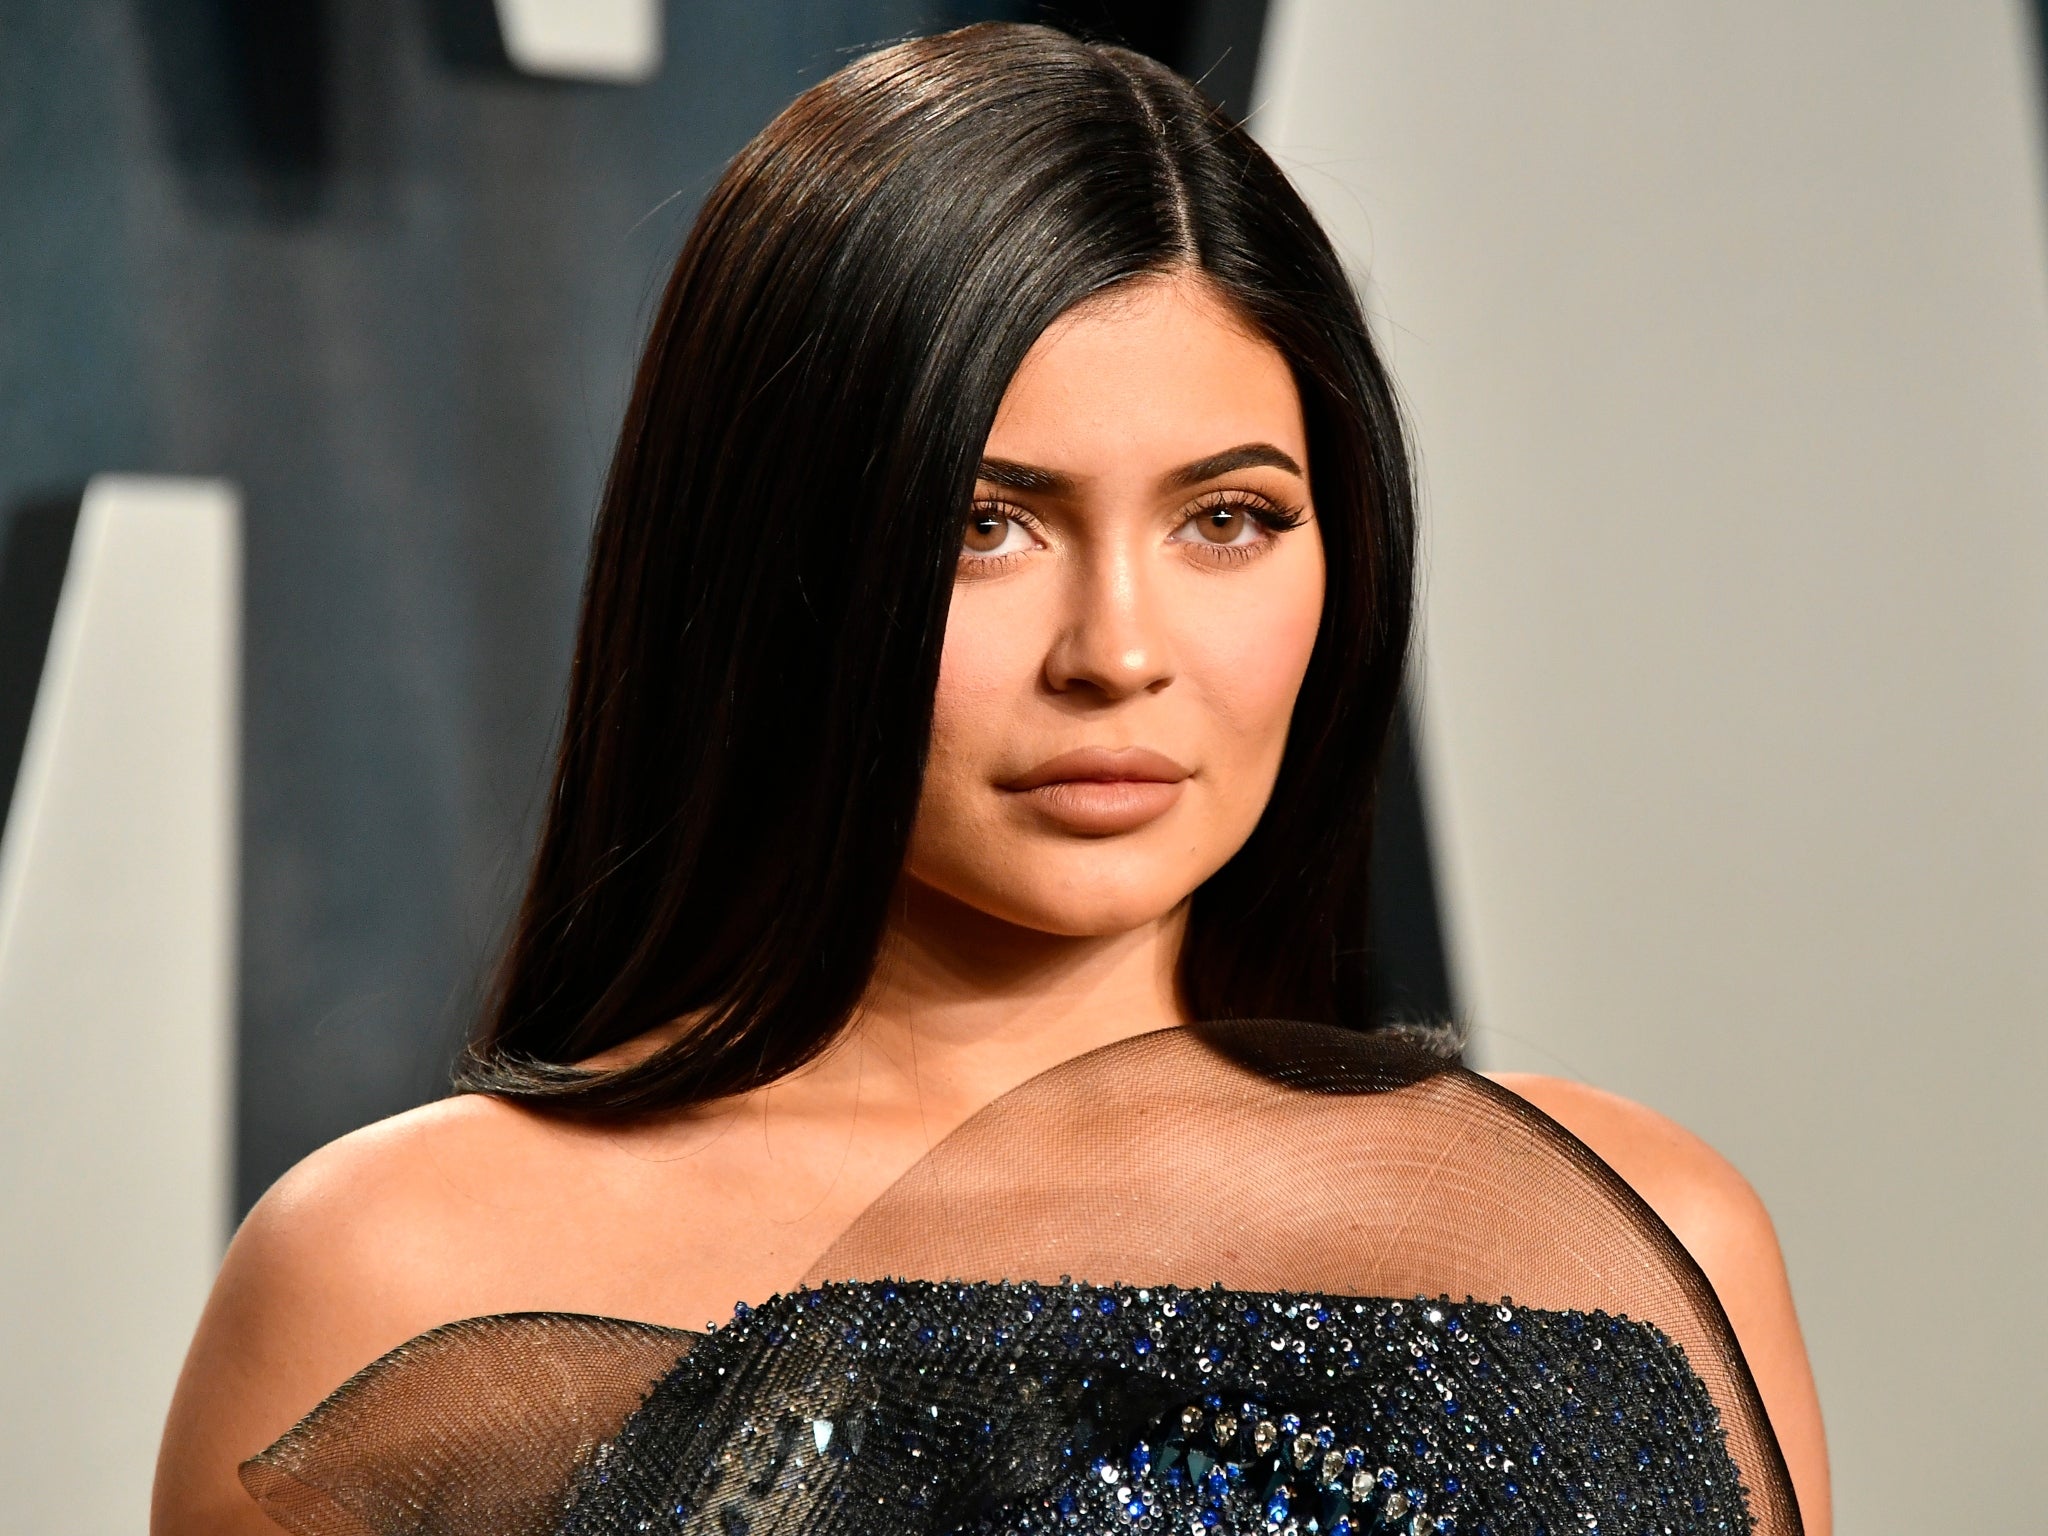 Kylie is the youngest of the Kardashian-Jenner siblings